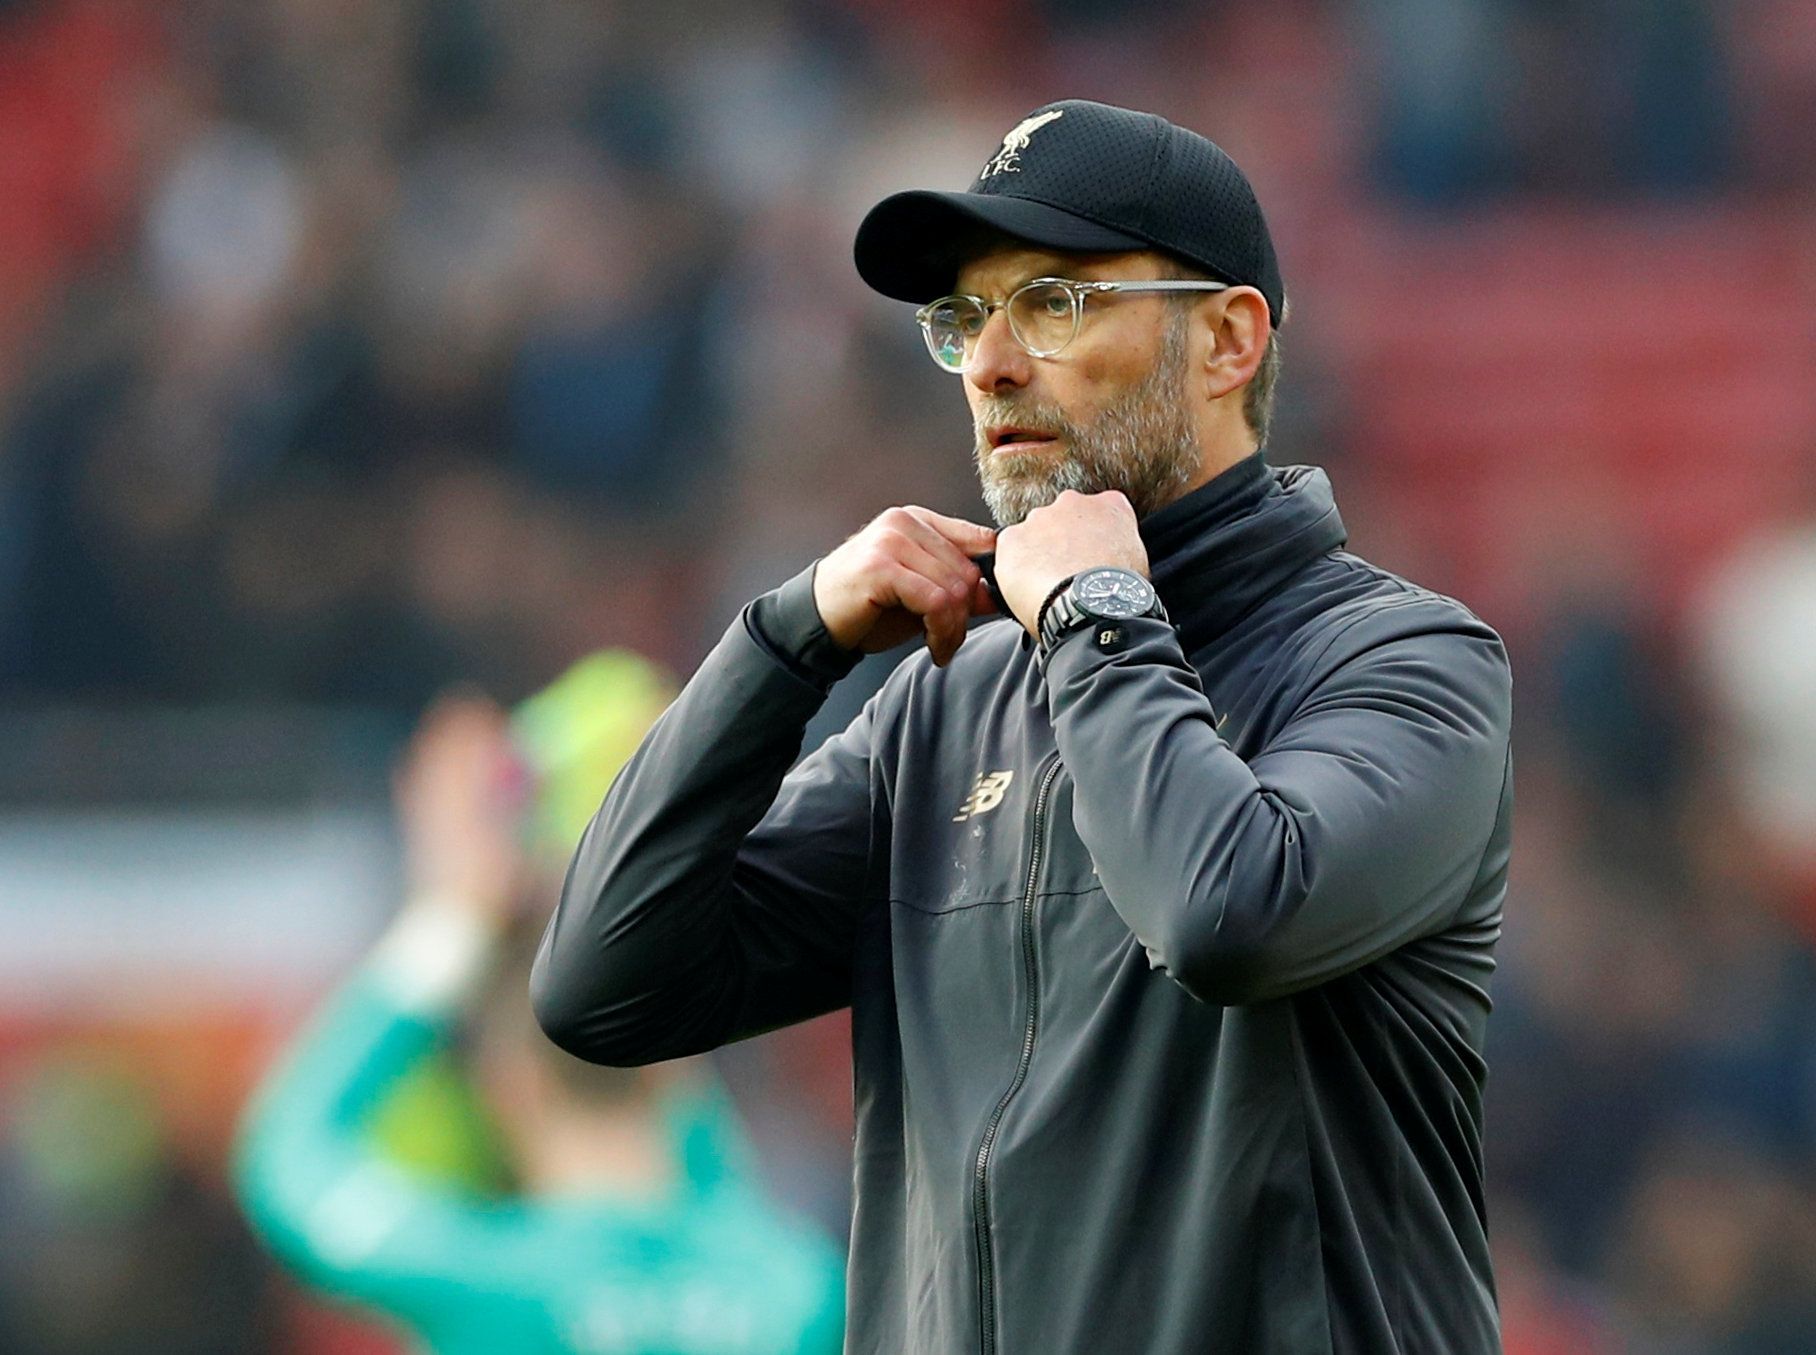 Soccer Football - Premier League - Manchester United v Liverpool - Old Trafford, Manchester, Britain - February 24, 2019  Liverpool manager Juergen Klopp at the end of the match   REUTERS/Phil Noble  EDITORIAL USE ONLY. No use with unauthorized audio, video, data, fixture lists, club/league logos or 